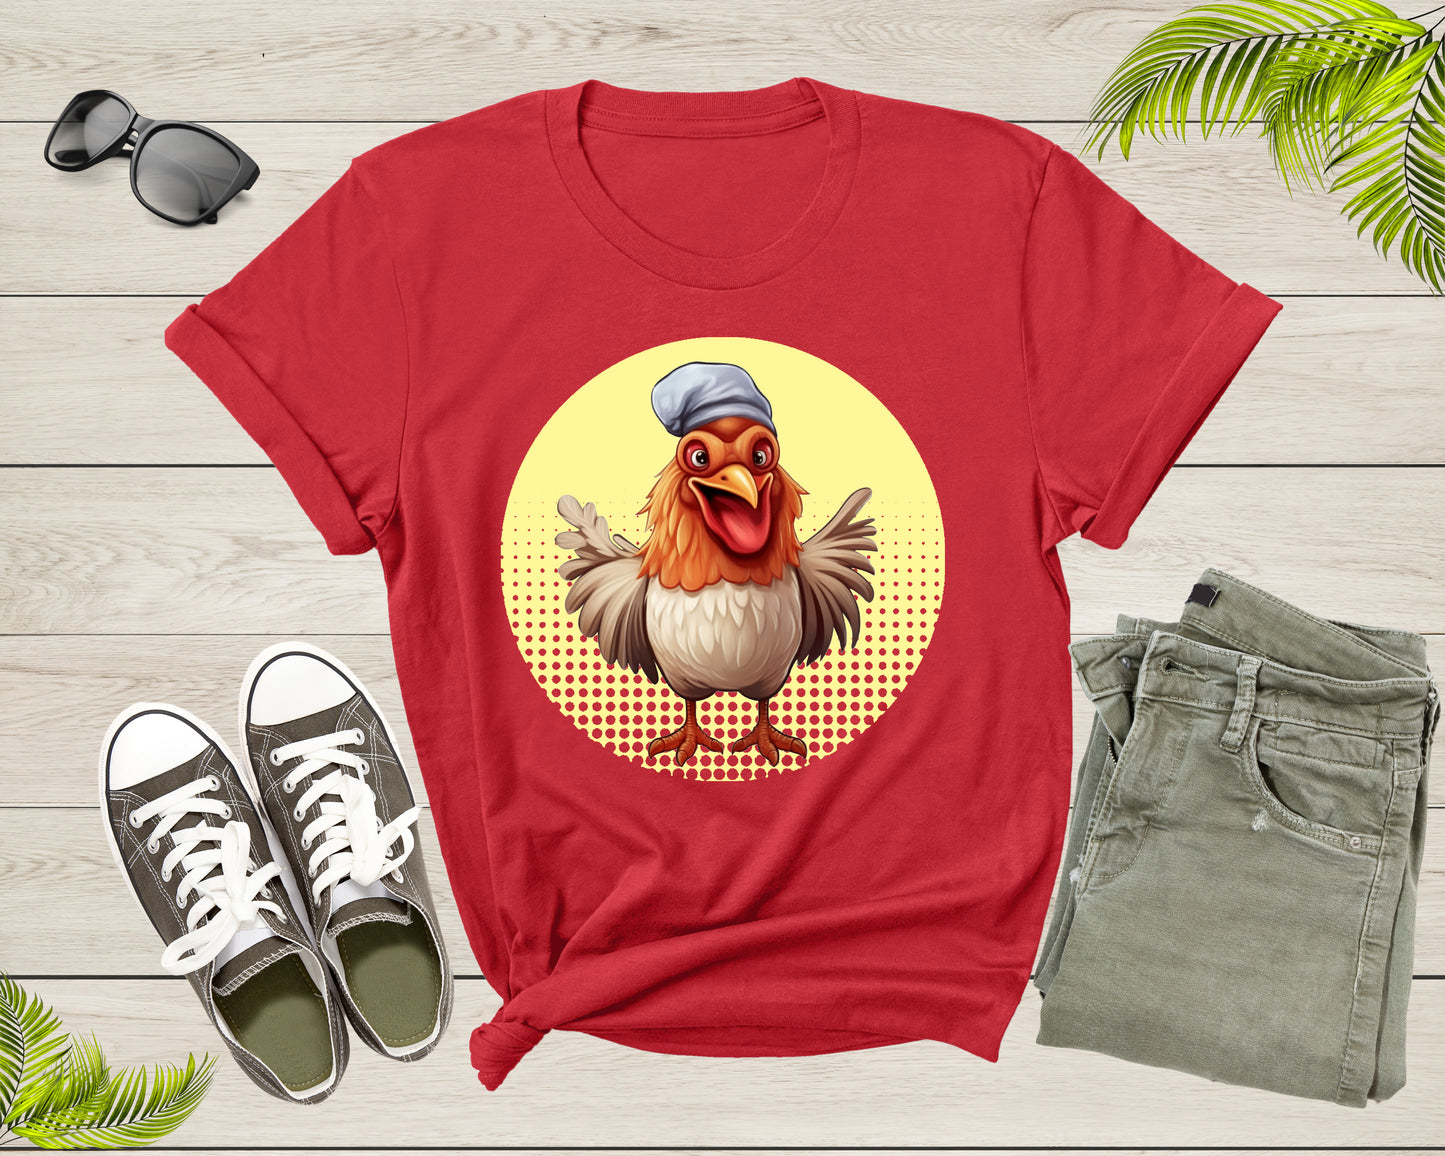 Funny Chicken Chef Gift For Chicken Lovers Cute Rooster T-shirt Farm Life Farmer Chicken Shirt For Men Women Kids Boys Girls Youth Tshirt